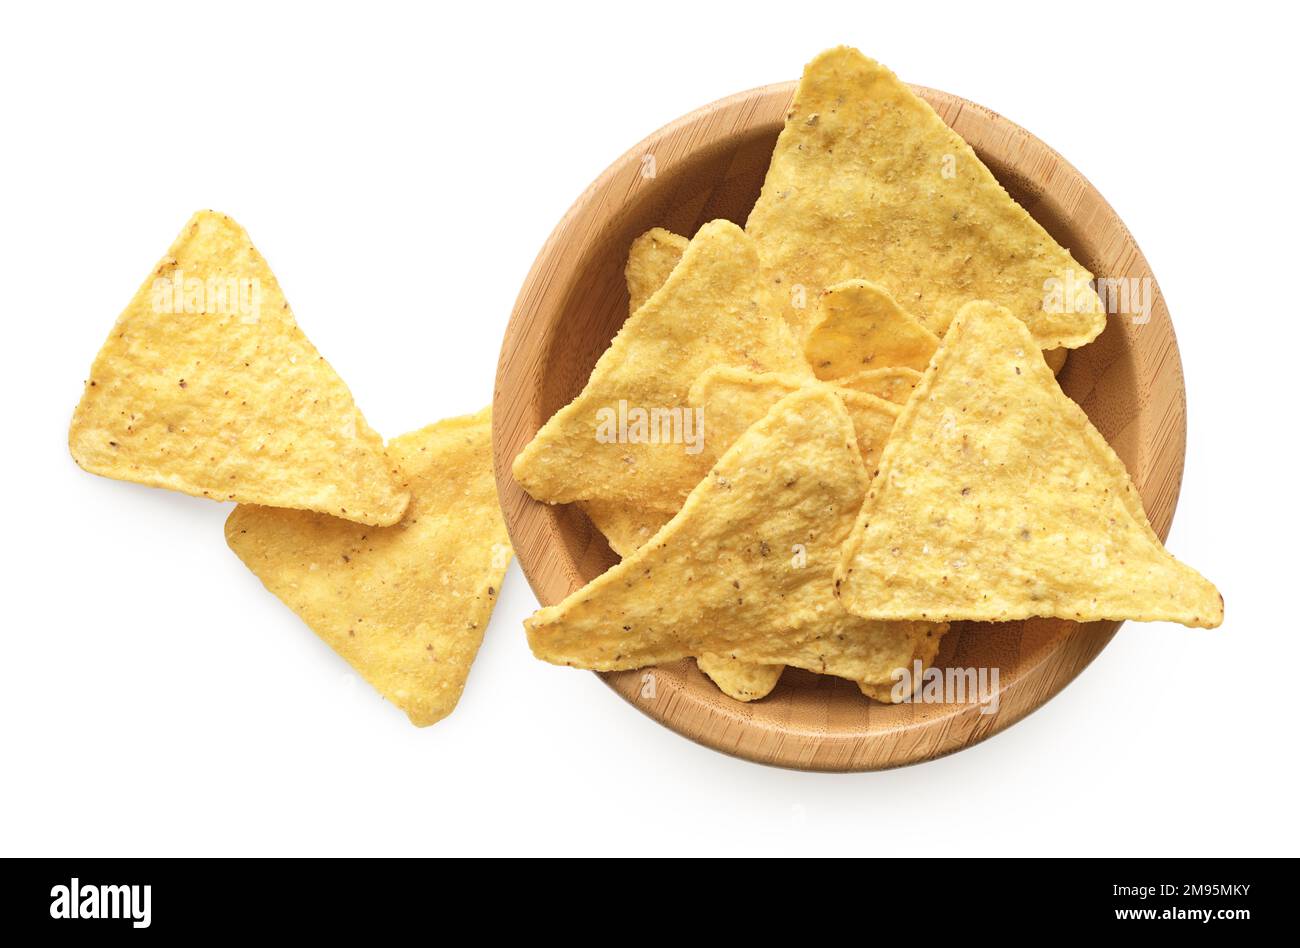 Corn chips in wooden bowl, isolated on white background Stock Photo